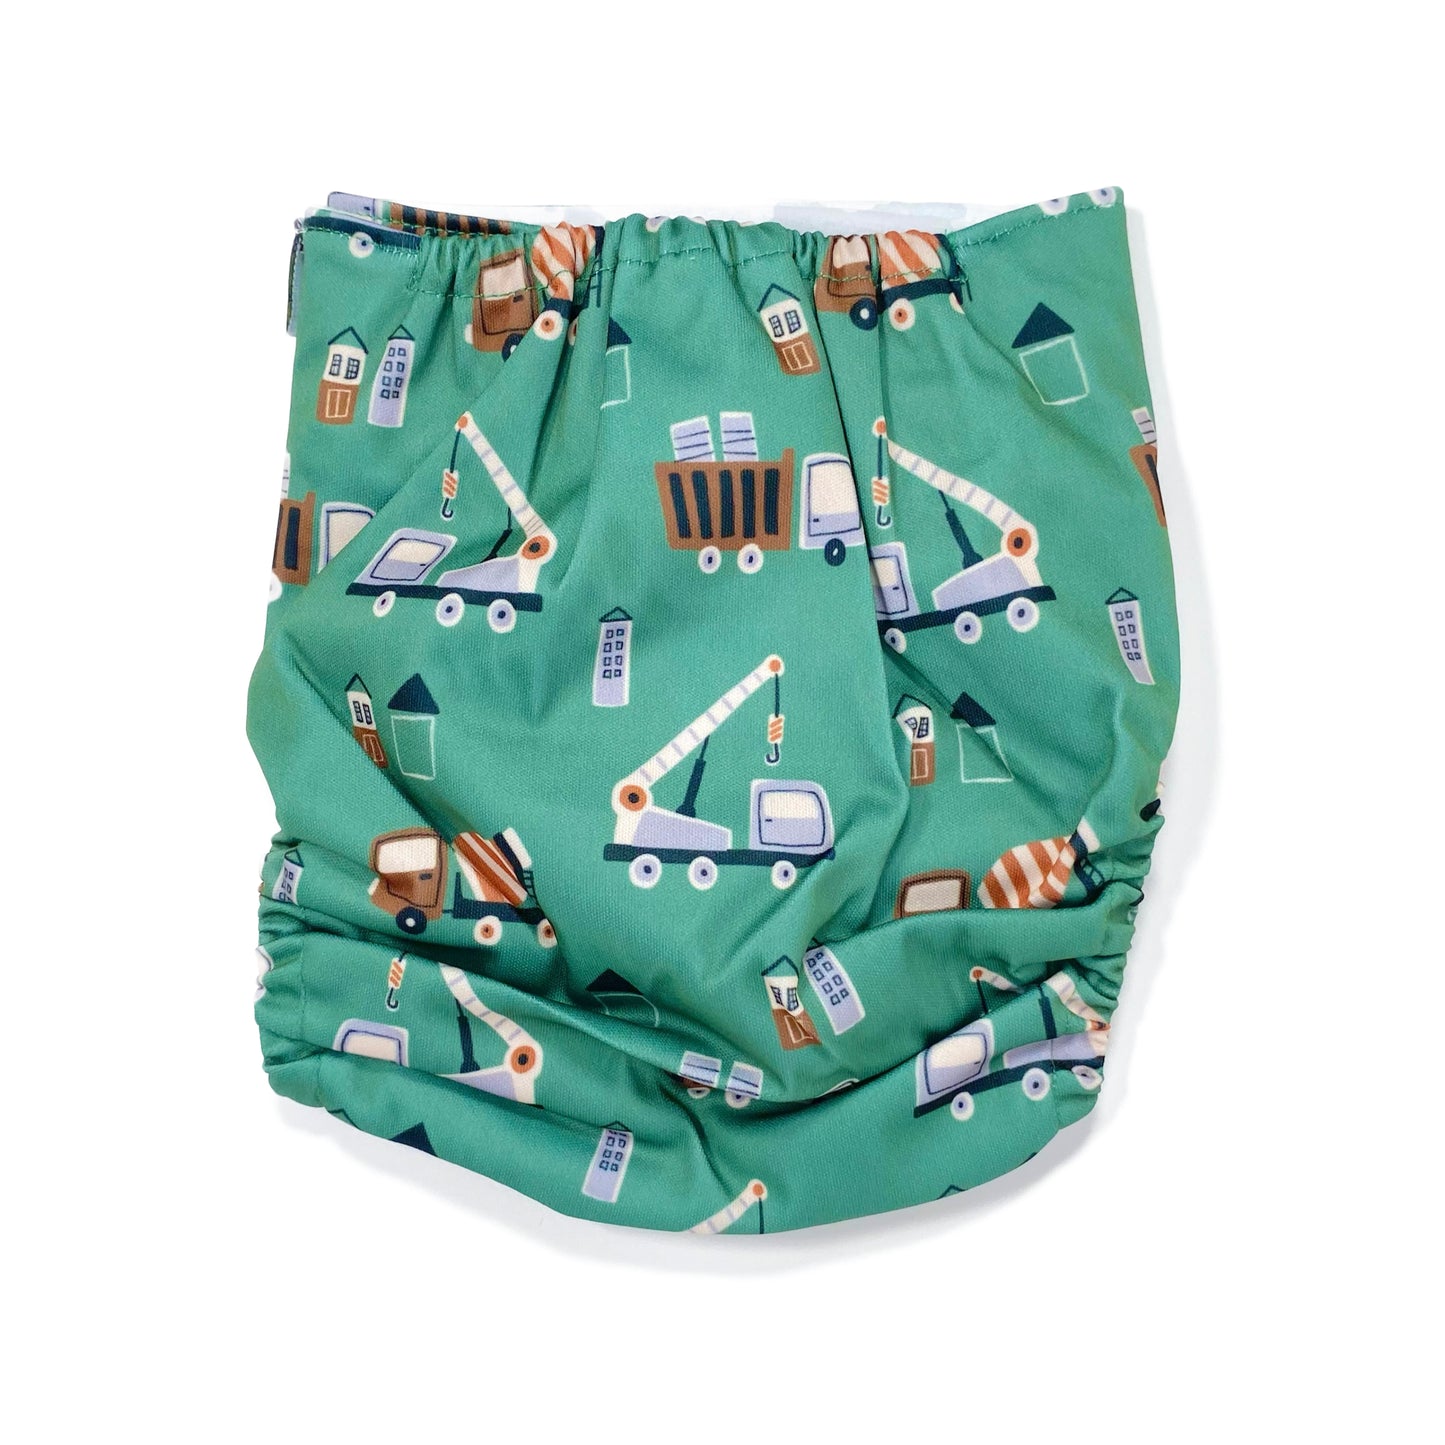 An adjustable reusable nappy for babies and toddlers, featuring a green construction design, with images of construction vehicles on a green background. View shows the back of the nappy.